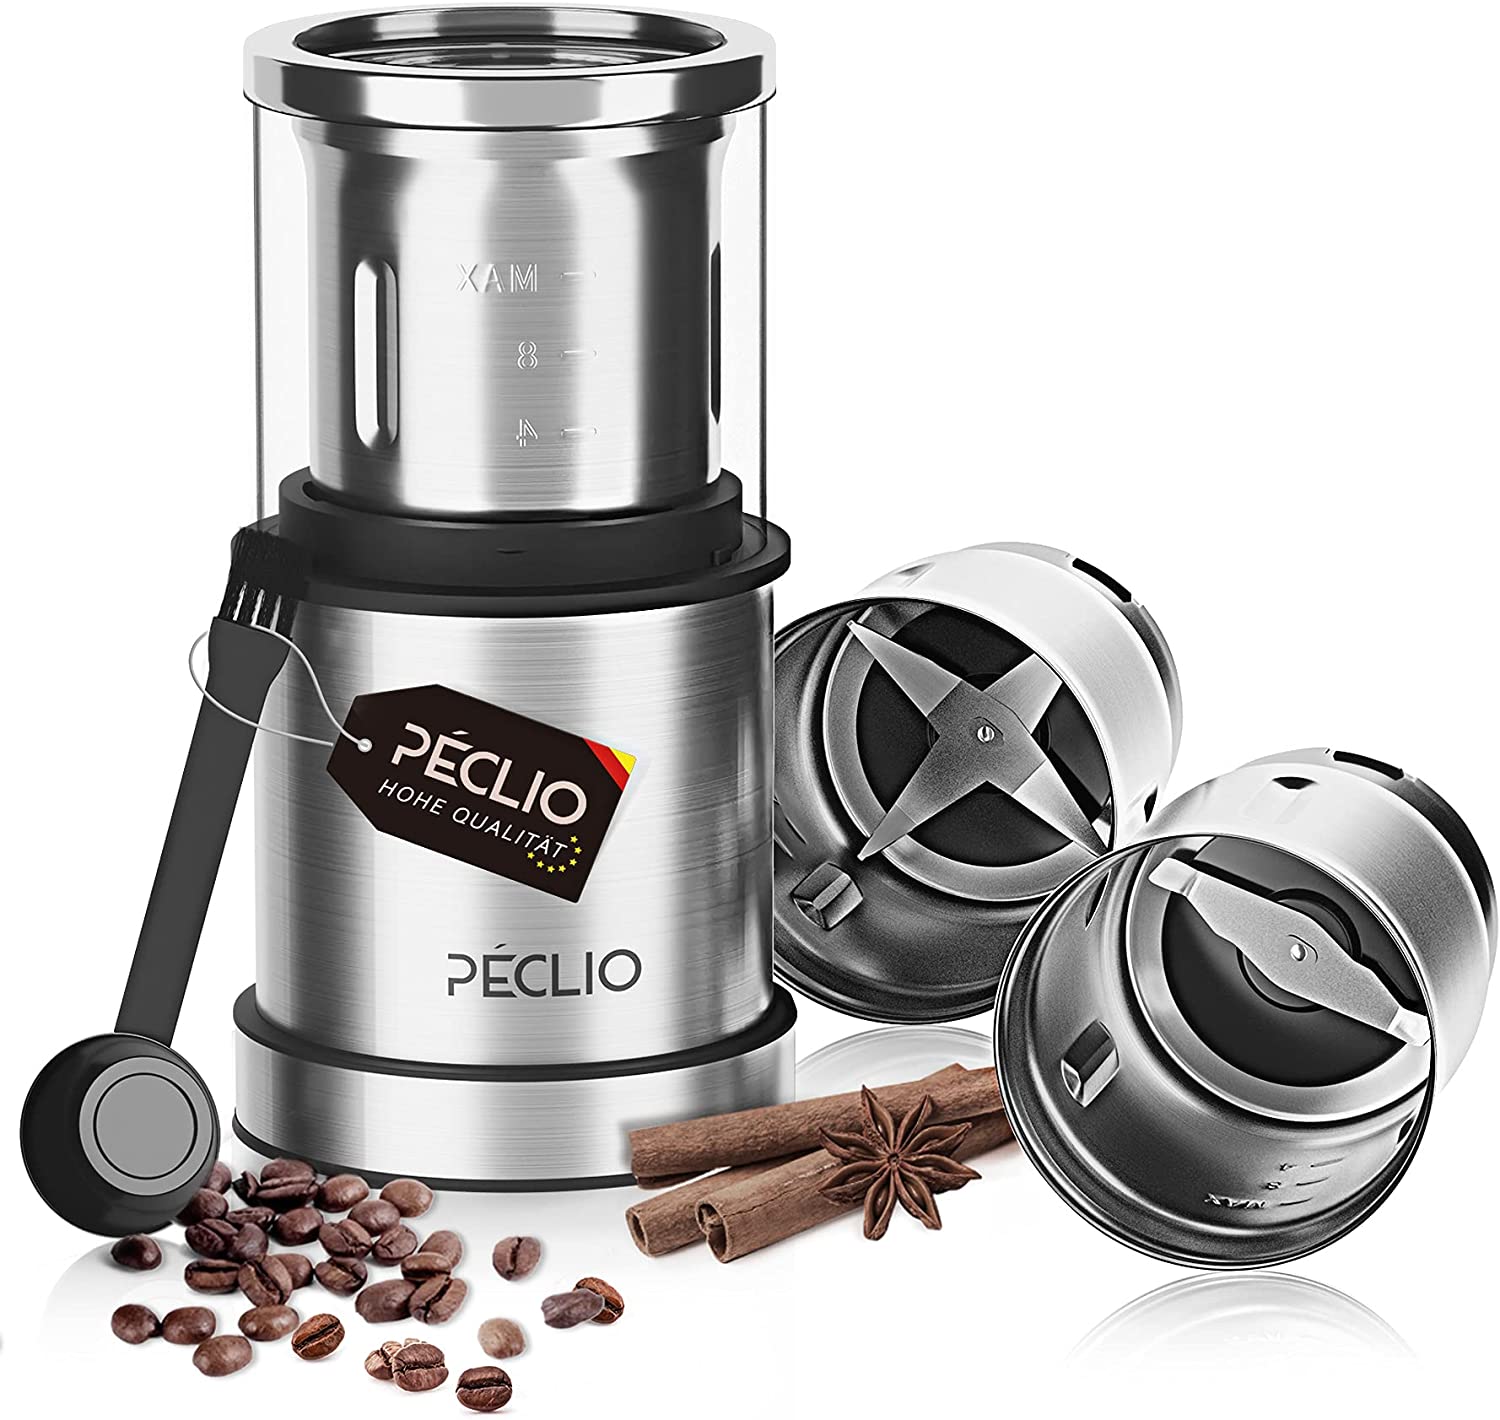 Peclio GS-805 Electric Spices and Coffee Grinder, 200 Watt with 2 Stainless Steel Containers with Dry and Wet Special Knife, Capacity 75 g, Spice Mill for Coffee Beans, Spices, Nuts, Pesto